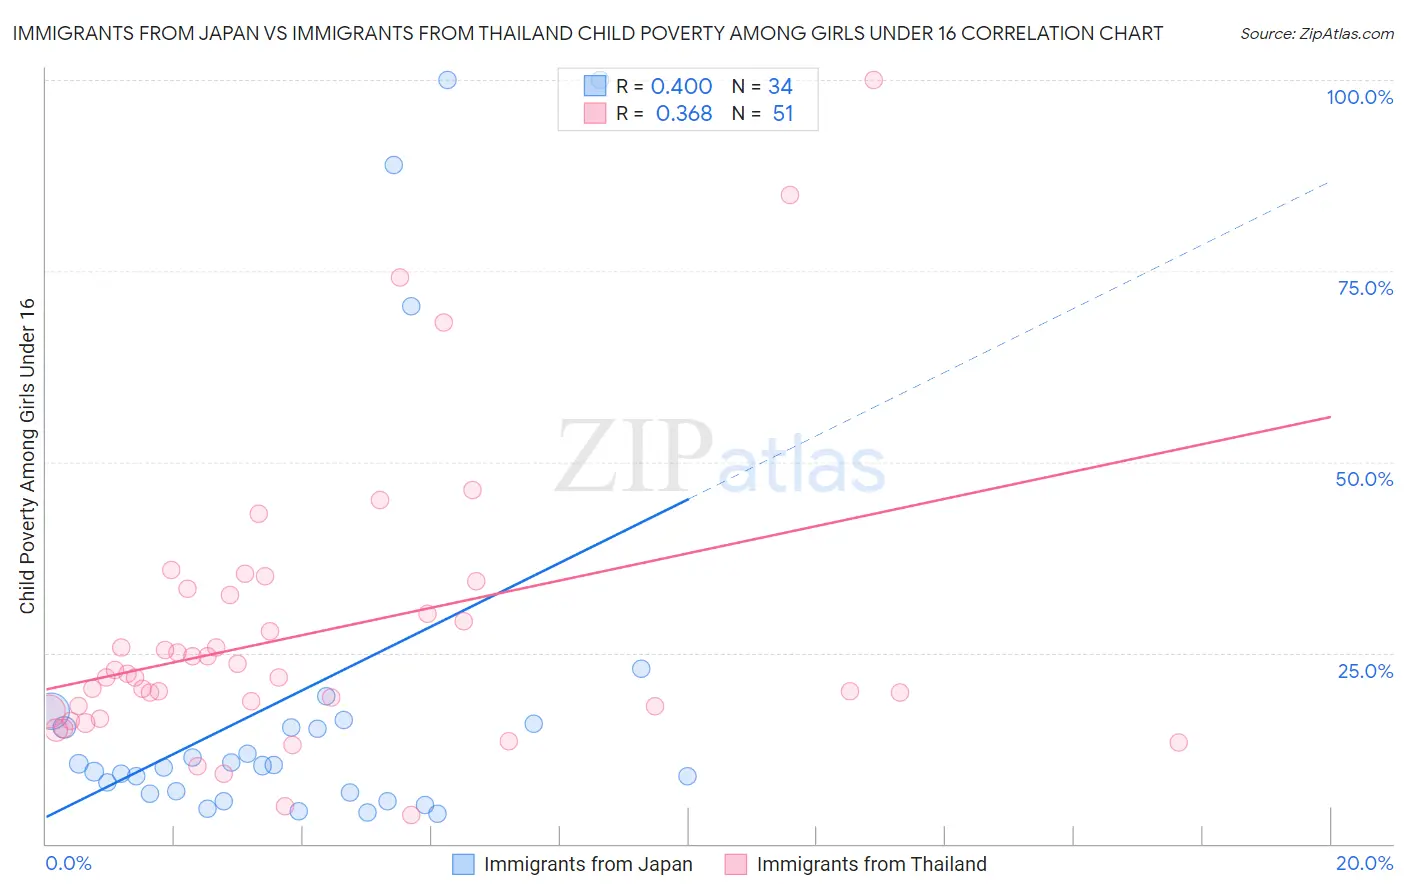 Immigrants from Japan vs Immigrants from Thailand Child Poverty Among Girls Under 16